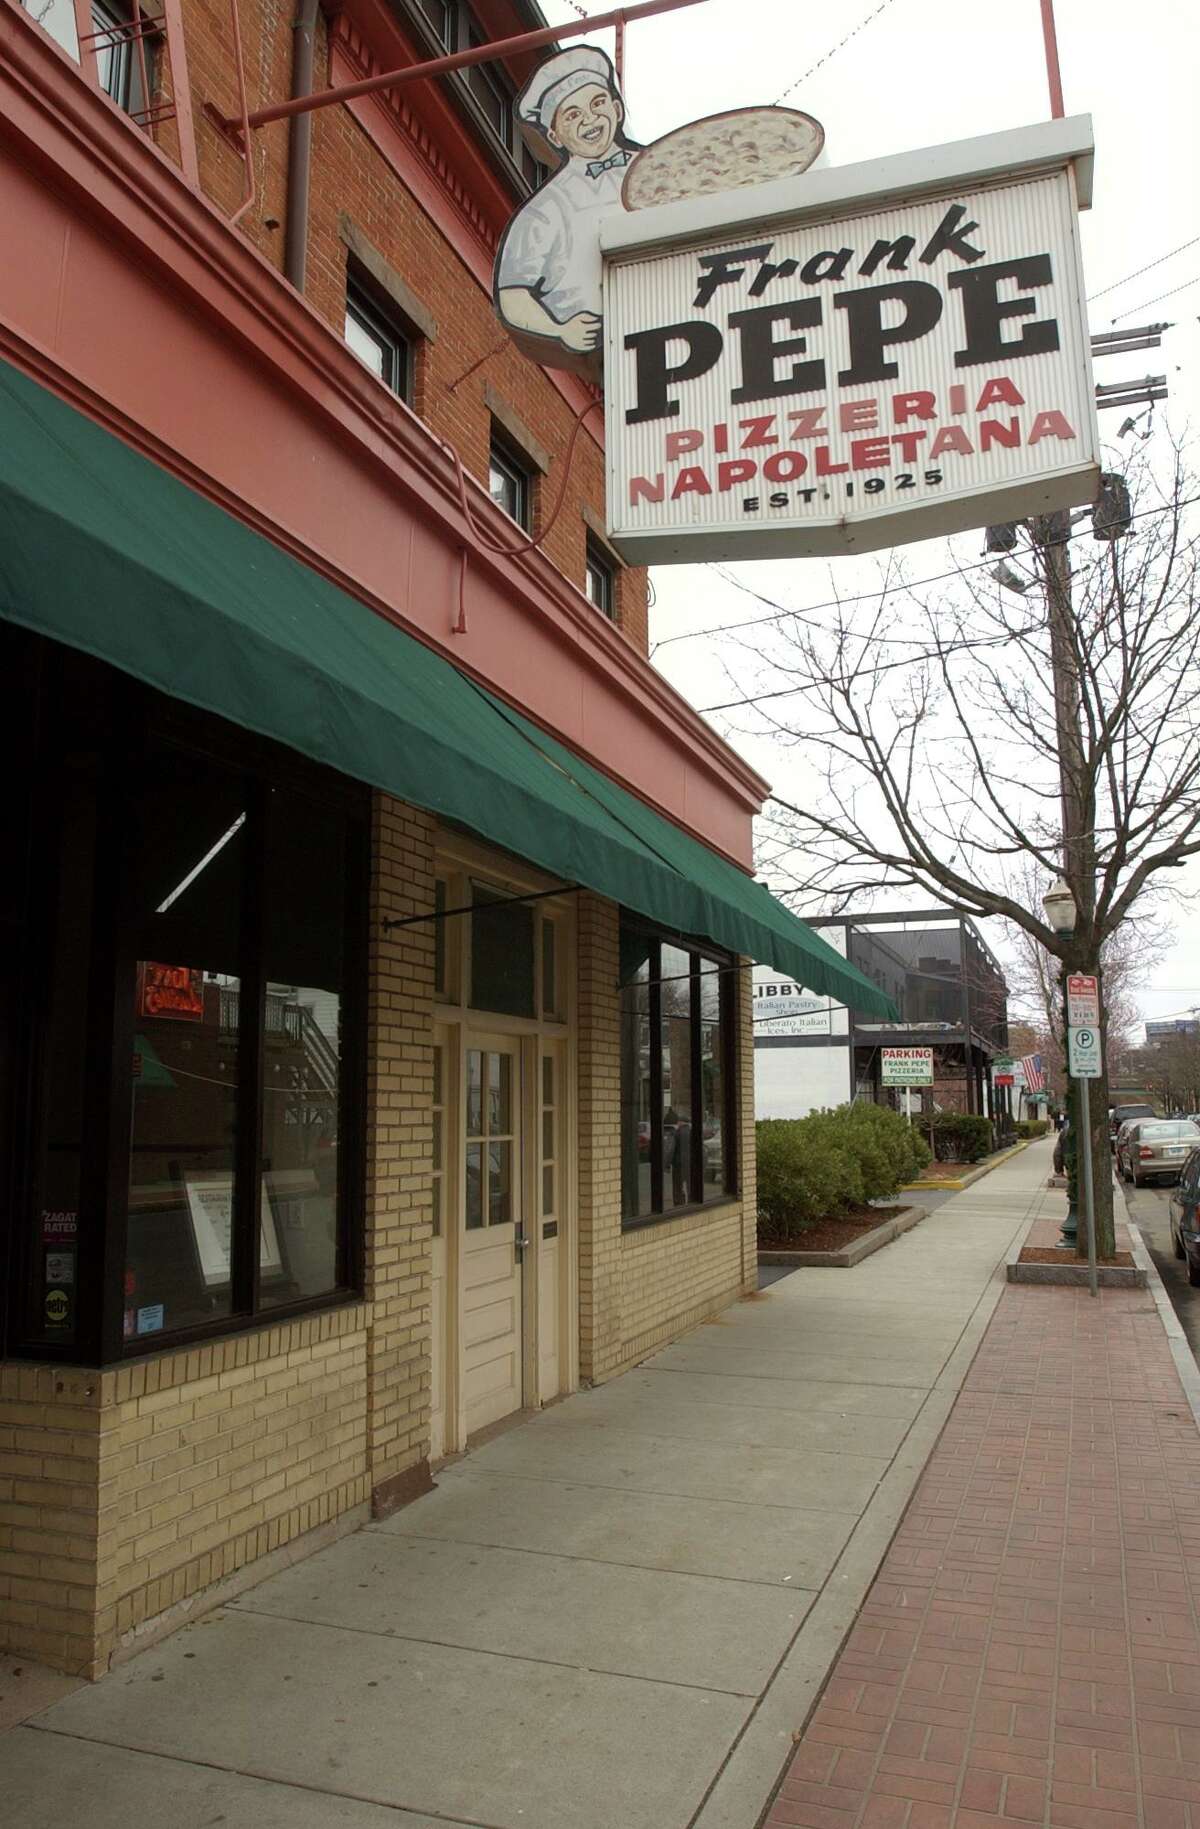 Spt4/2/04 Photo by Mara Lavitt--Pepe's ML0121C #1309 Pepe's Pizzeria, exterior, Wooster St. New Haven.